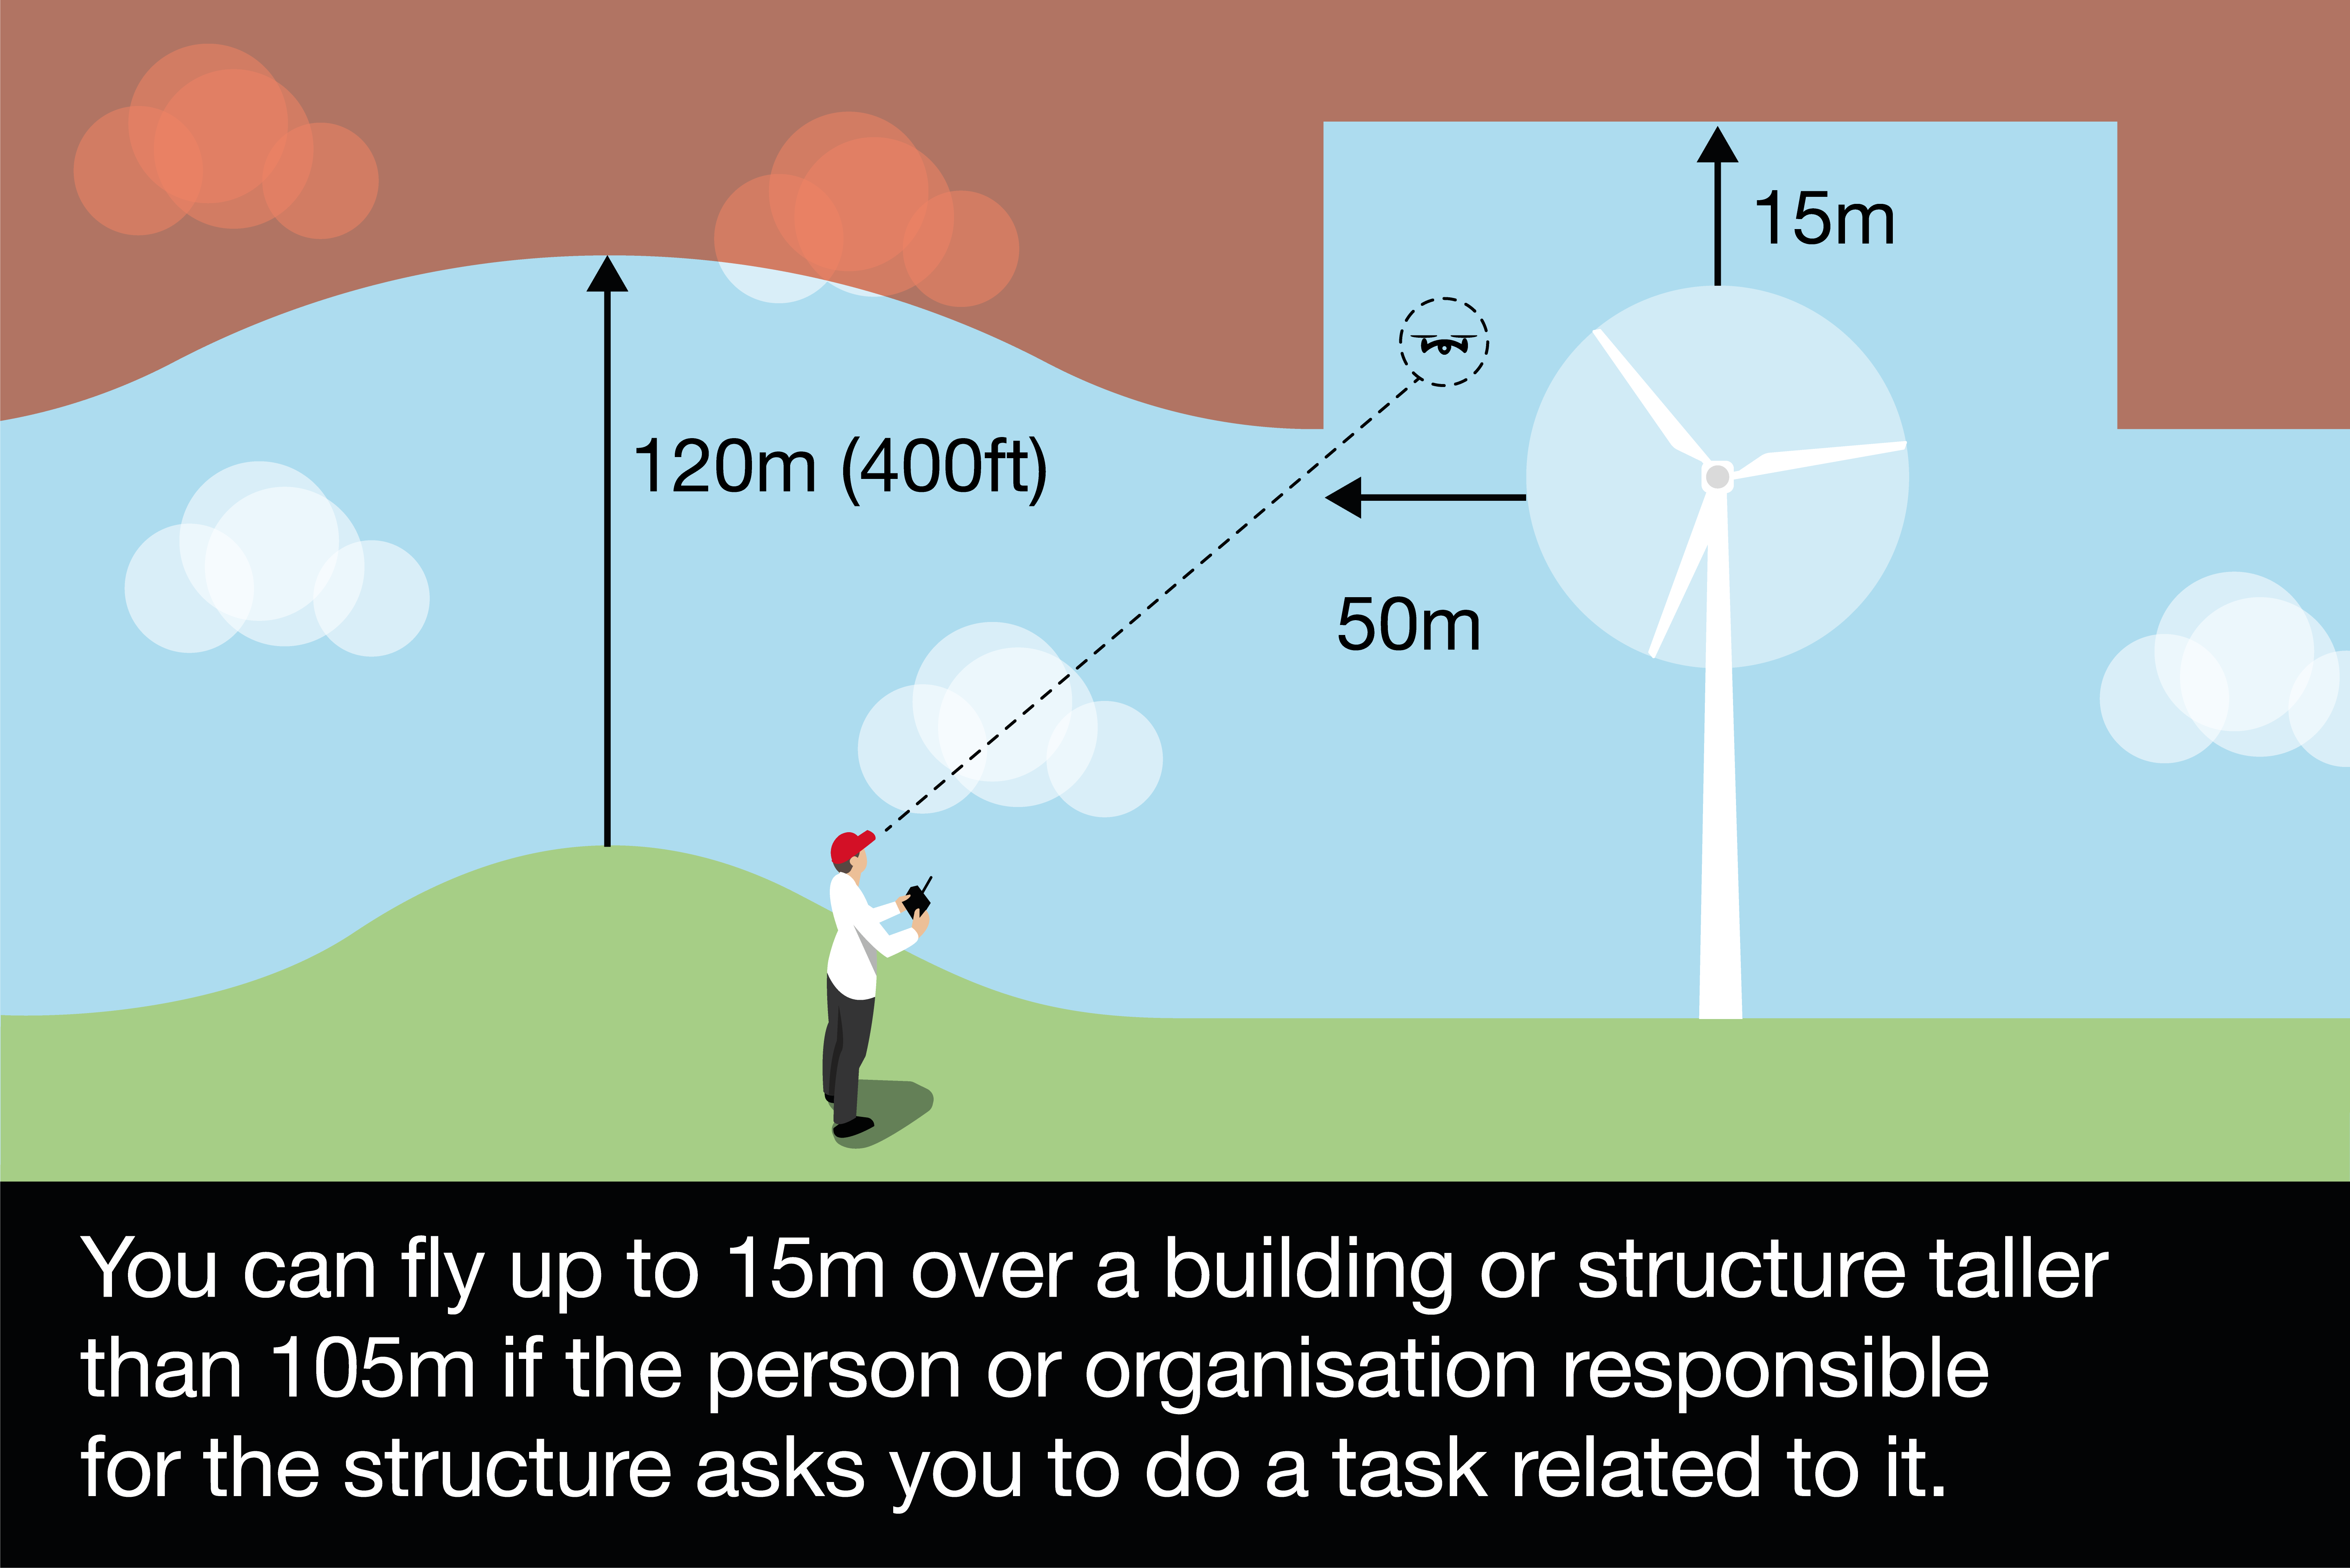 You can fly up to 15m over a building or structure taller than 105m if the person or organisation responsible for the structure asks you to do a task related to it.